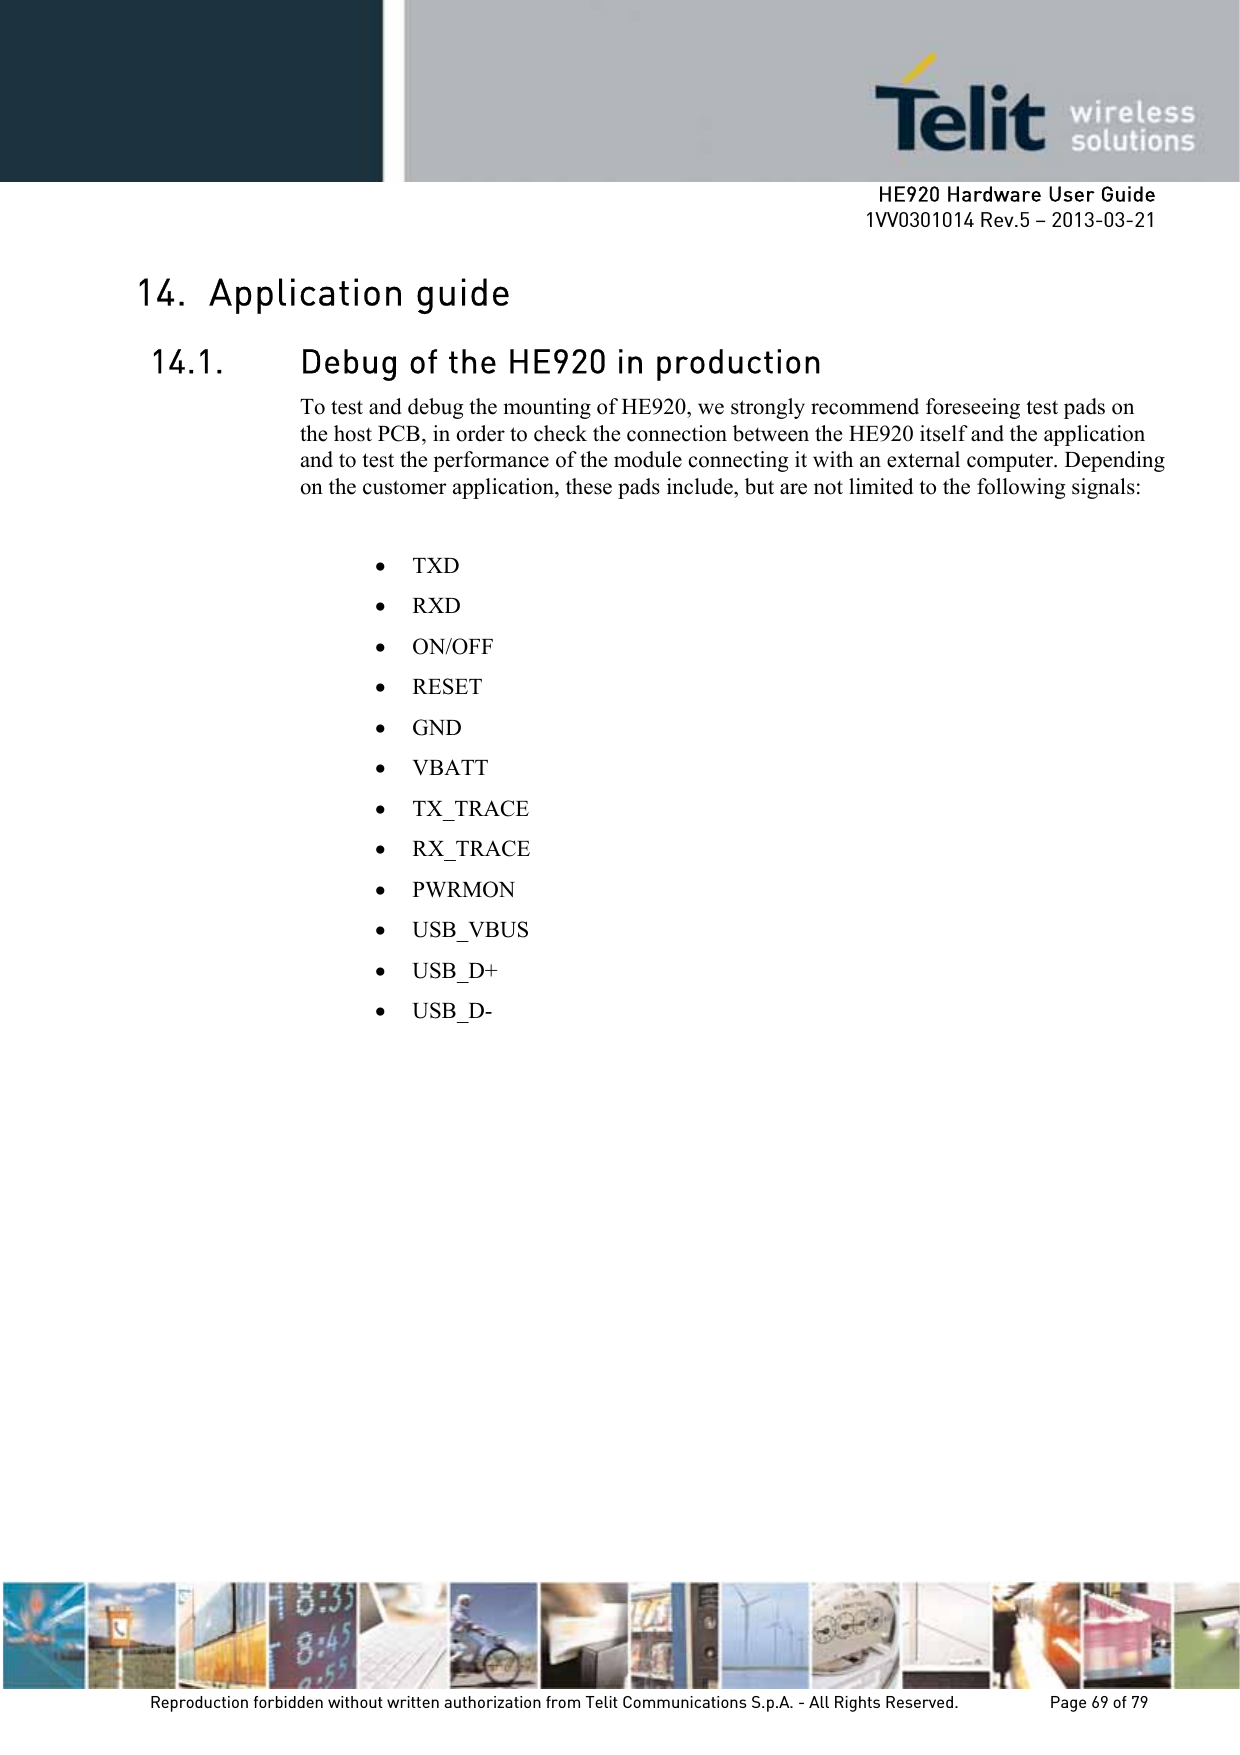     HE920 Hardware User Guide 1VV0301014 Rev.5 – 2013-03-21 Reproduction forbidden without written authorization from Telit Communications S.p.A. - All Rights Reserved.    Page 69 of 79  14. Application guide 14.1. Debug of the HE920 in production To test and debug the mounting of HE920, we strongly recommend foreseeing test pads on the host PCB, in order to check the connection between the HE920 itself and the application and to test the performance of the module connecting it with an external computer. Depending on the customer application, these pads include, but are not limited to the following signals:  • TXD • RXD • ON/OFF • RESET • GND • VBATT • TX_TRACE • RX_TRACE • PWRMON  • USB_VBUS • USB_D+ • USB_D- 